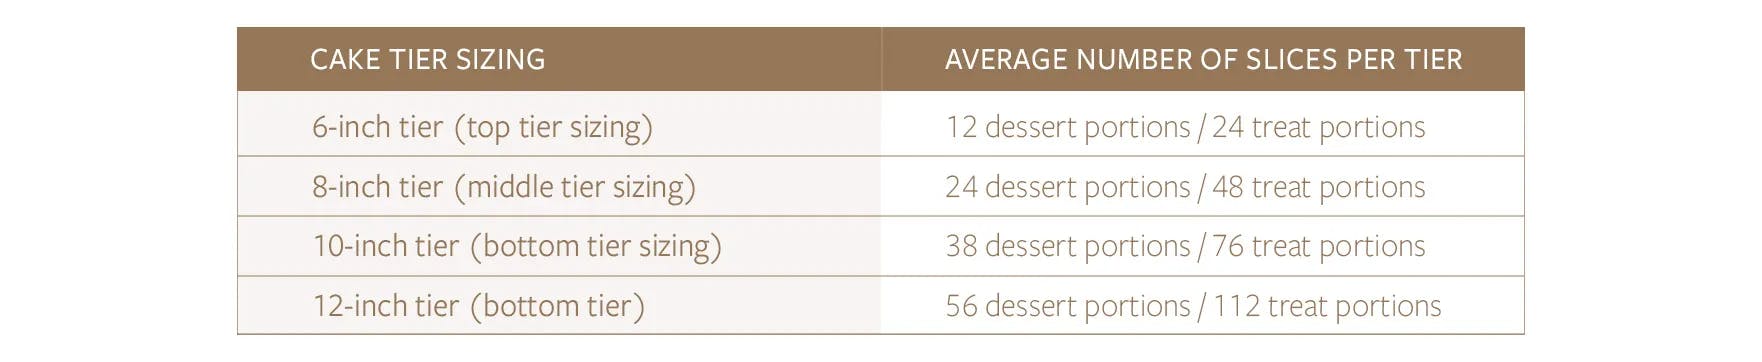 Cake-tier size pricing table